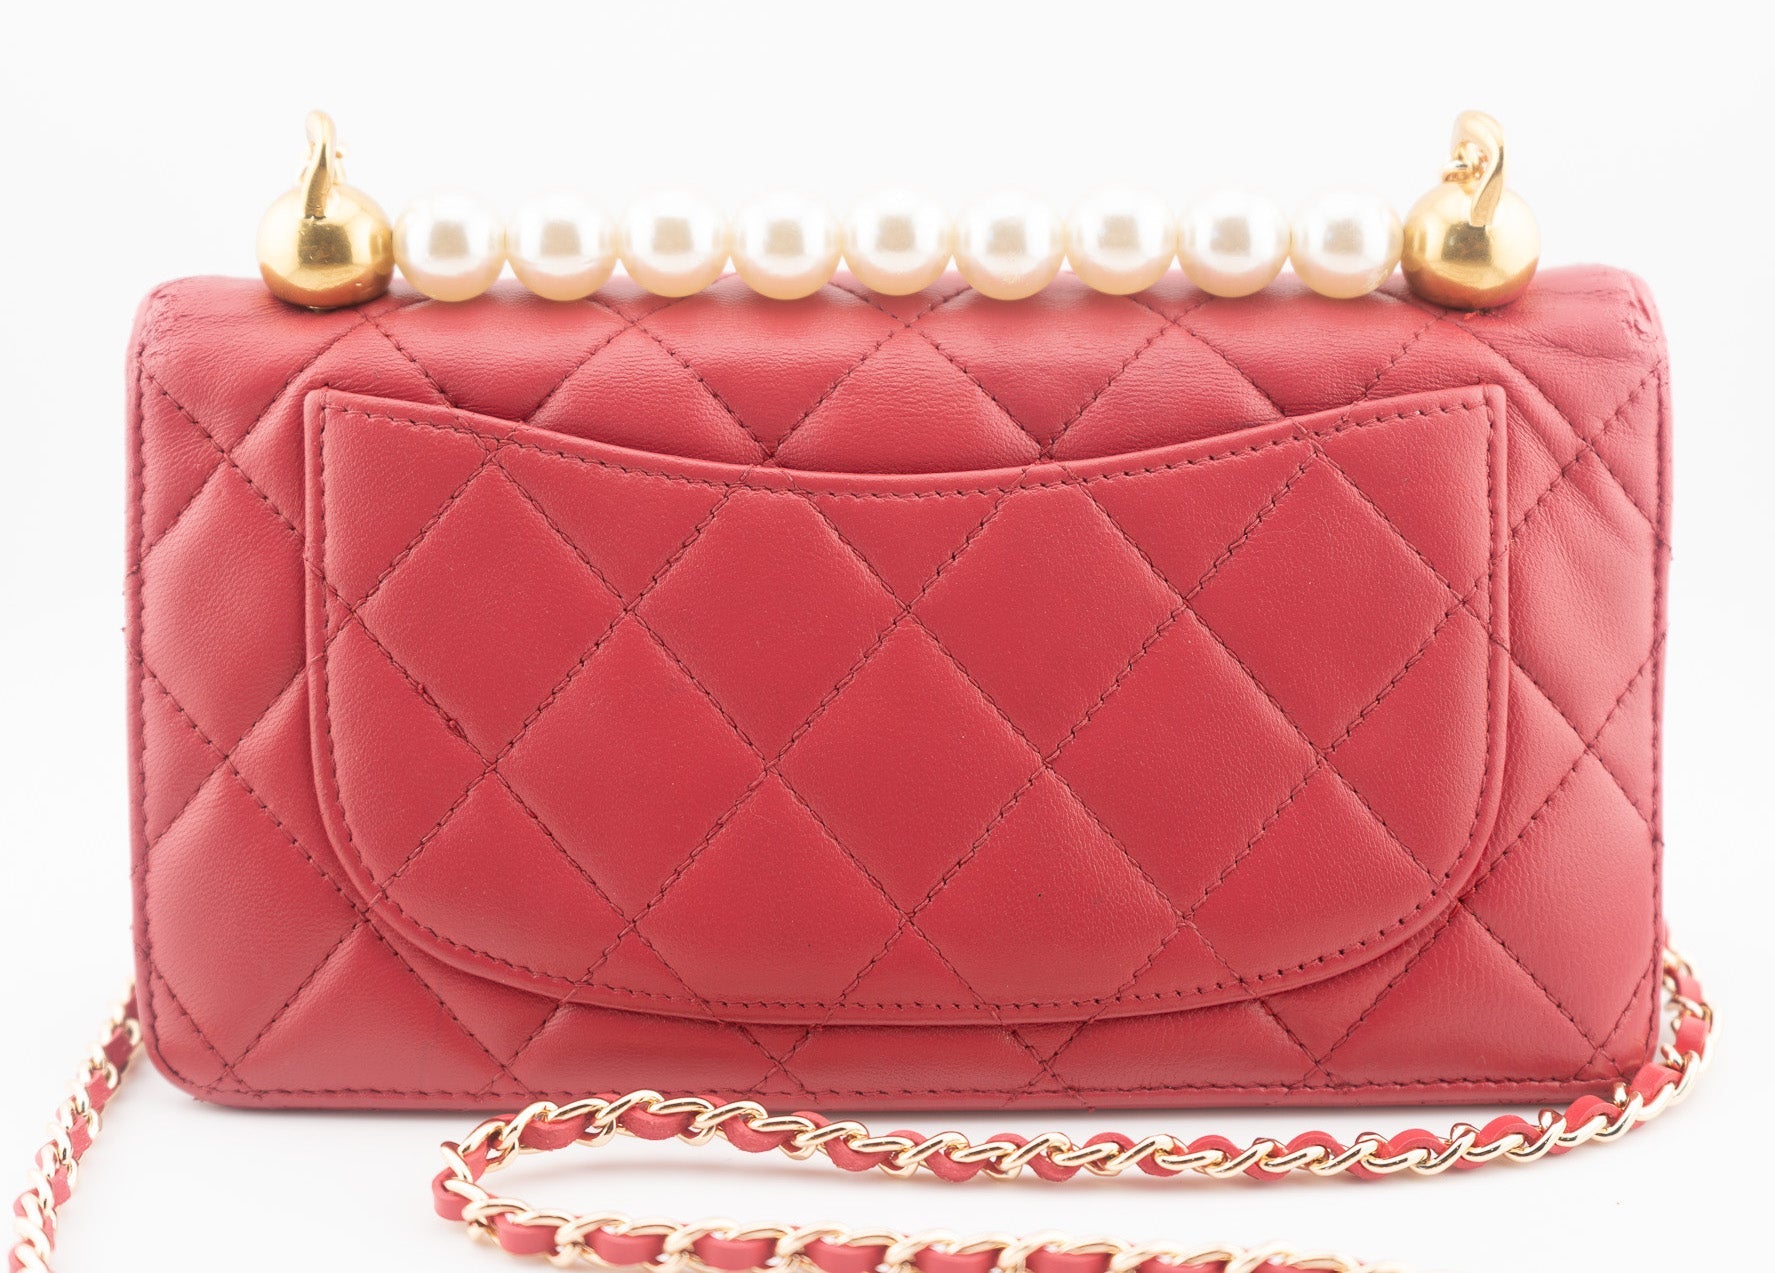 CHANEL Lambskin Bifold Wallet with Pearl Crown & Leather Chain - Bag Envy